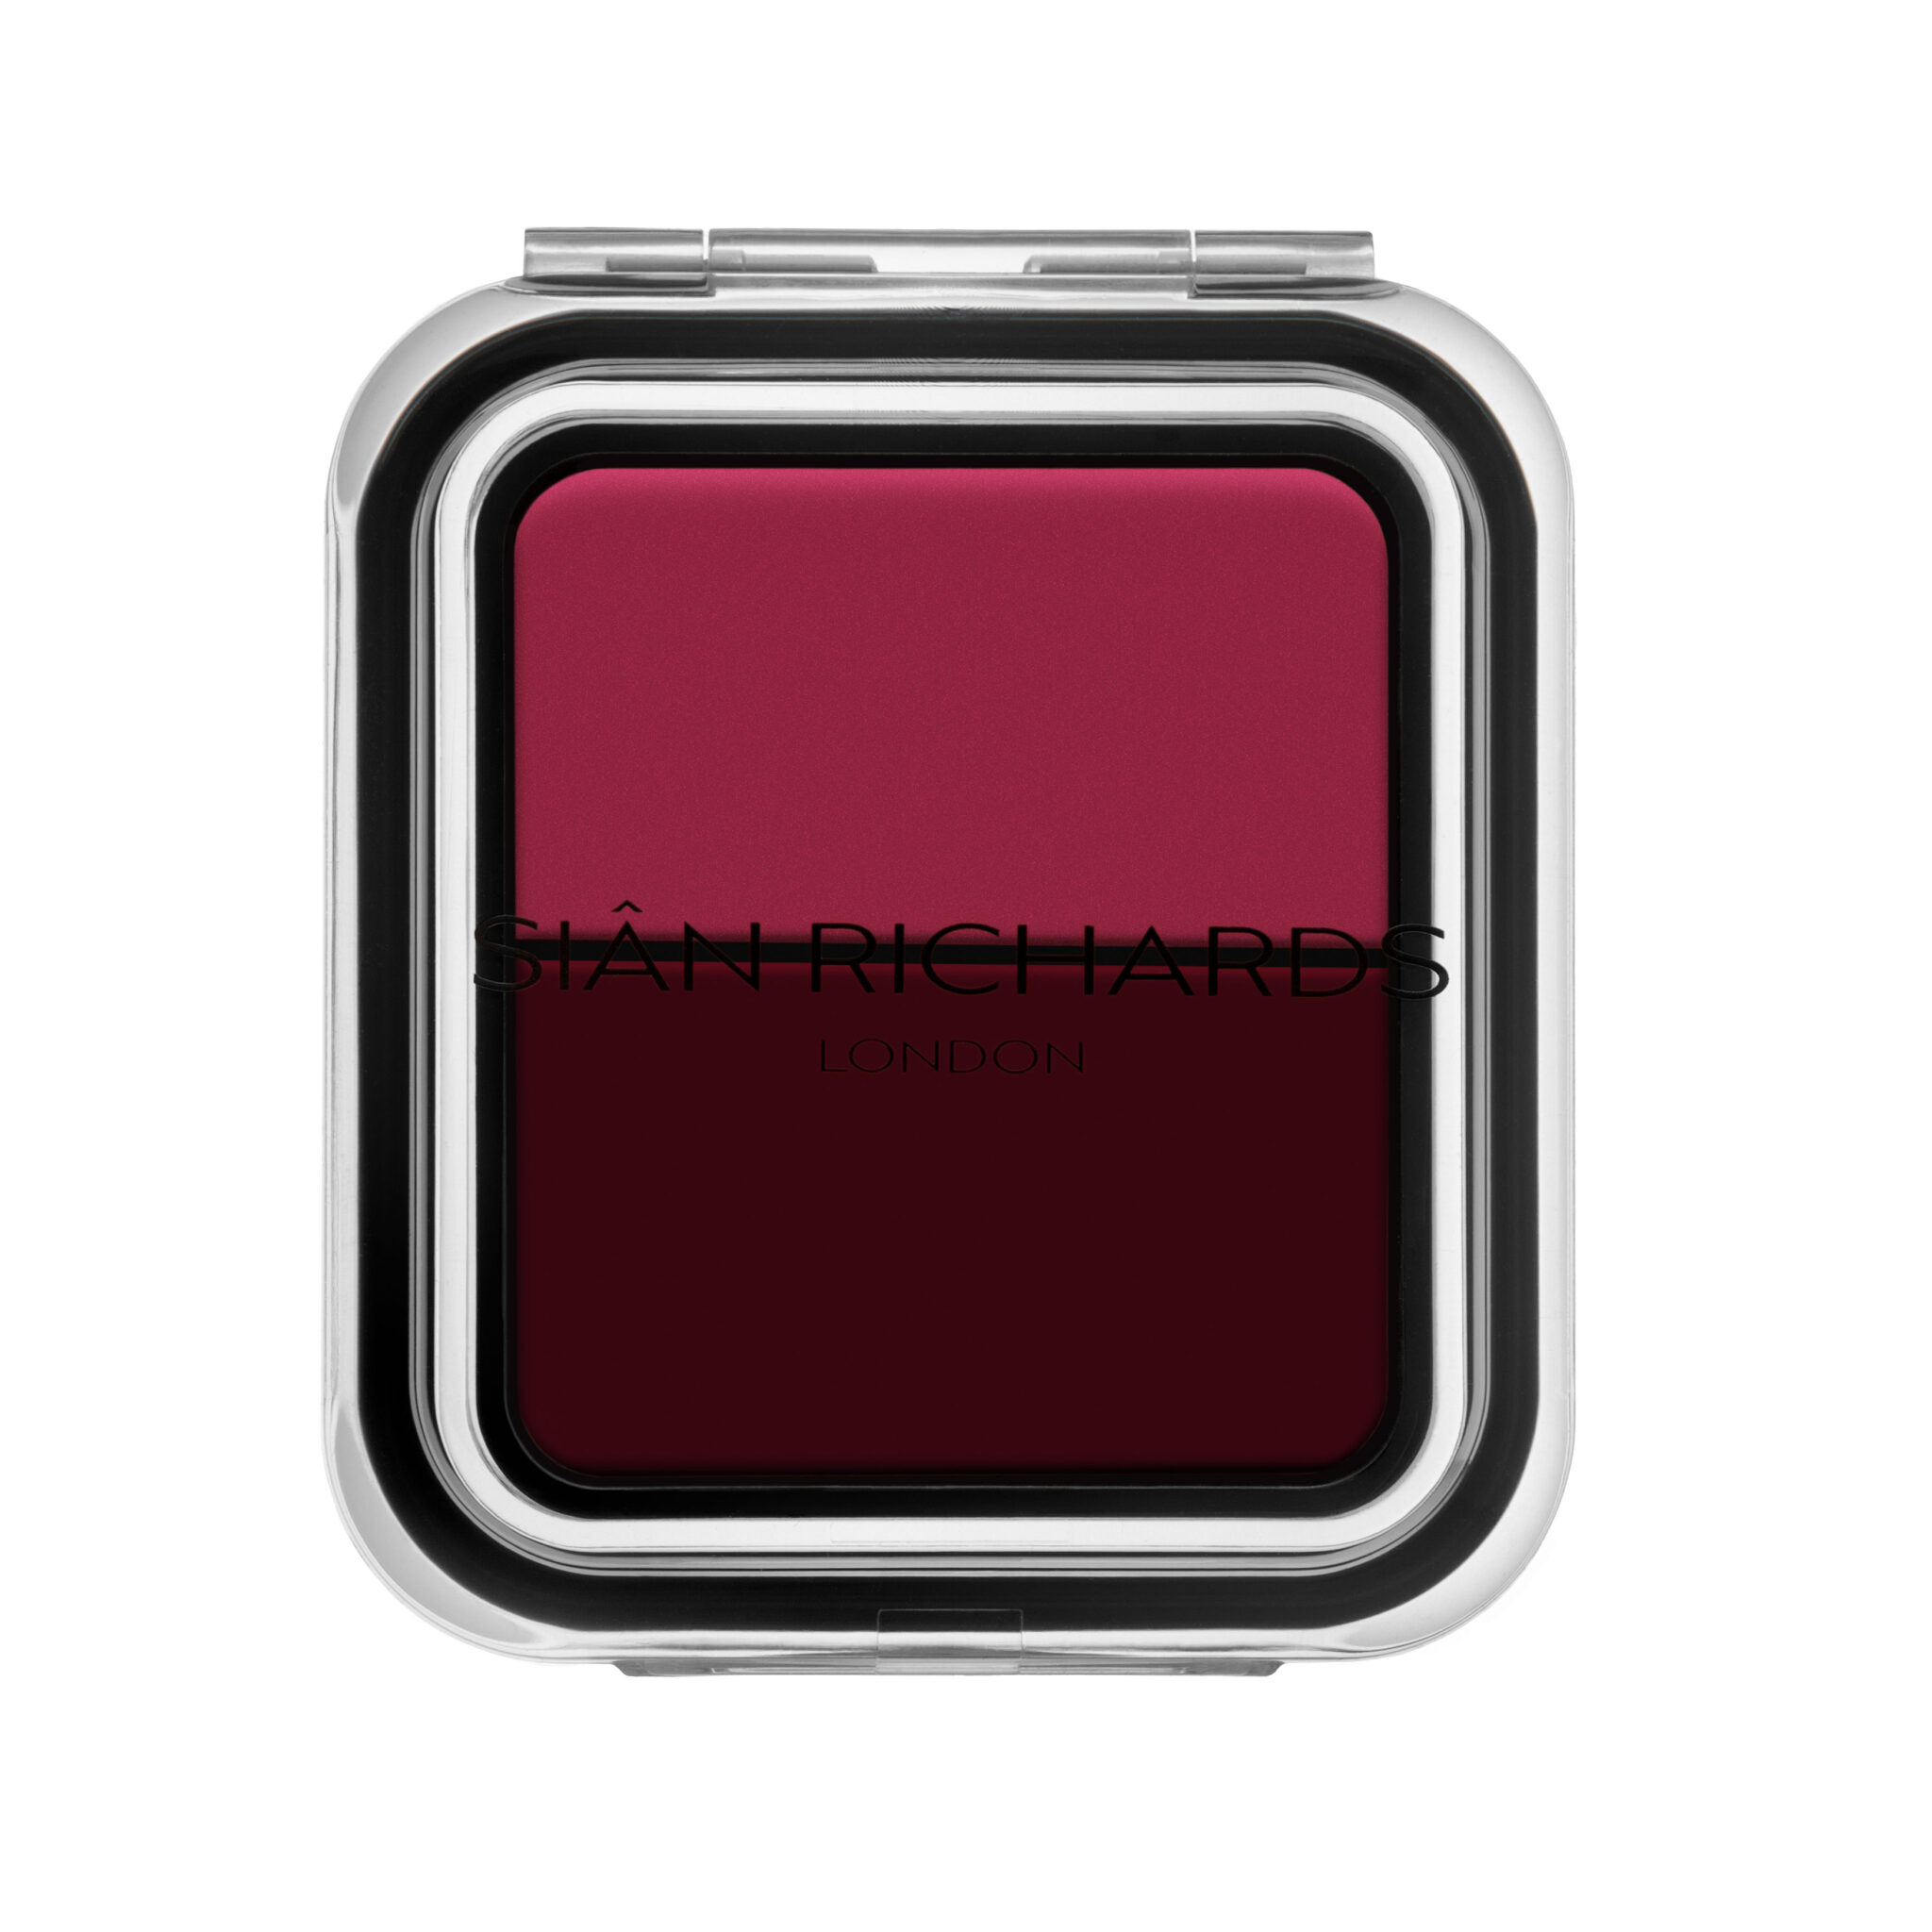 Shiner Duo Compact Nocturne by Siân Richards London